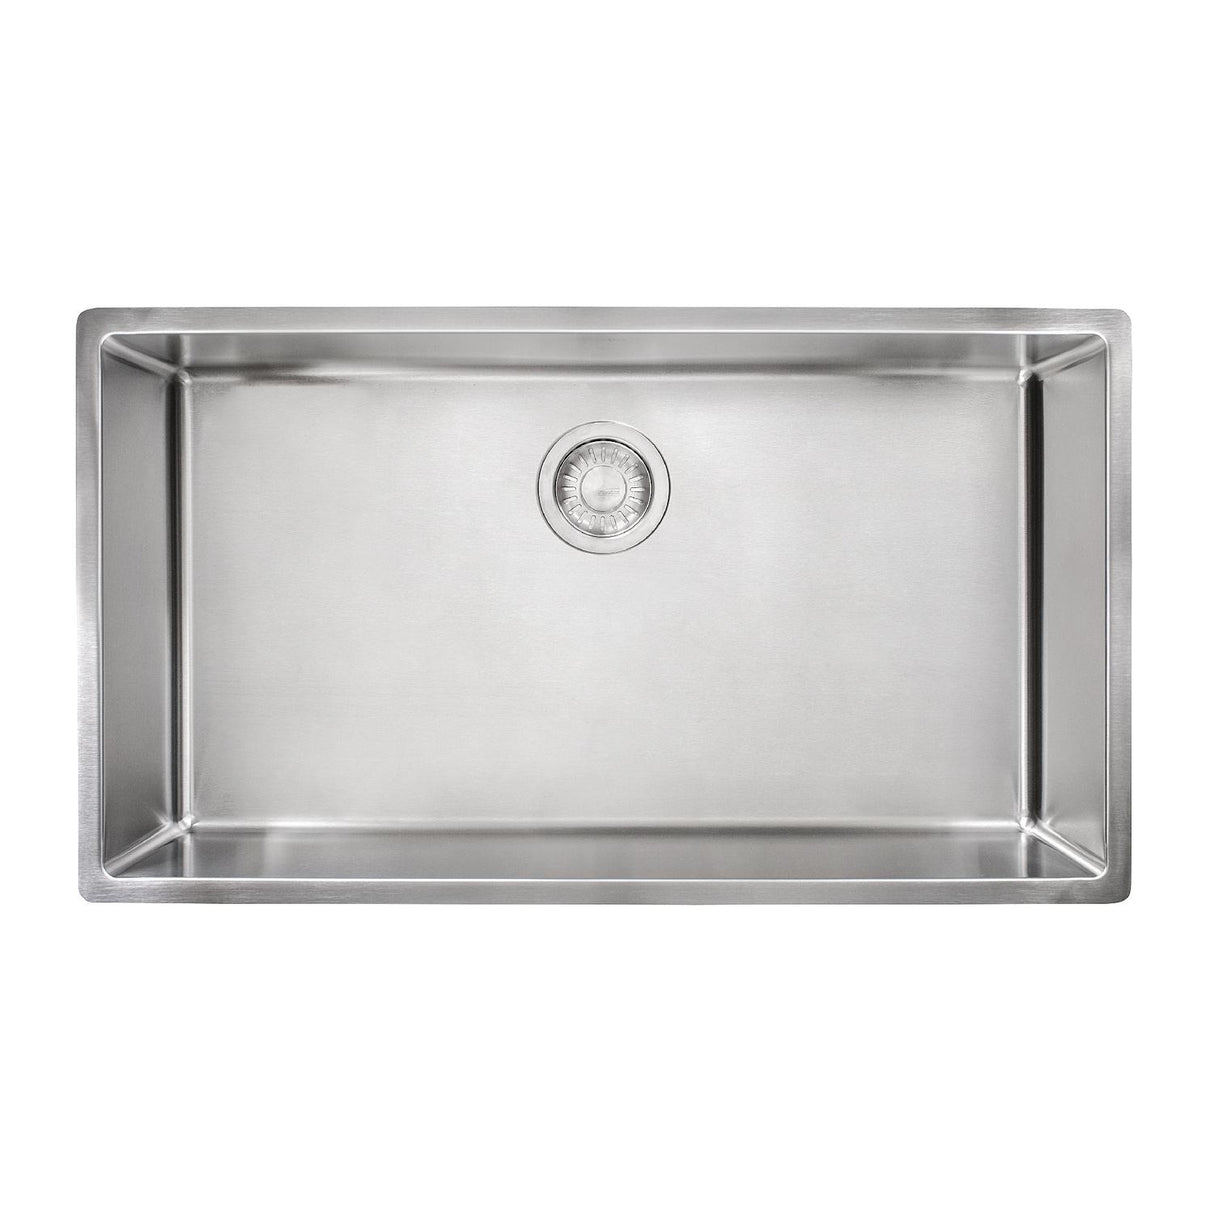 FRANKE CUX11030 Cube 31.5-in. x 17.7-in. 18 Gauge Stainless Steel Undermount Single Bowl Kitchen Sink - CUX11030 In Pearl